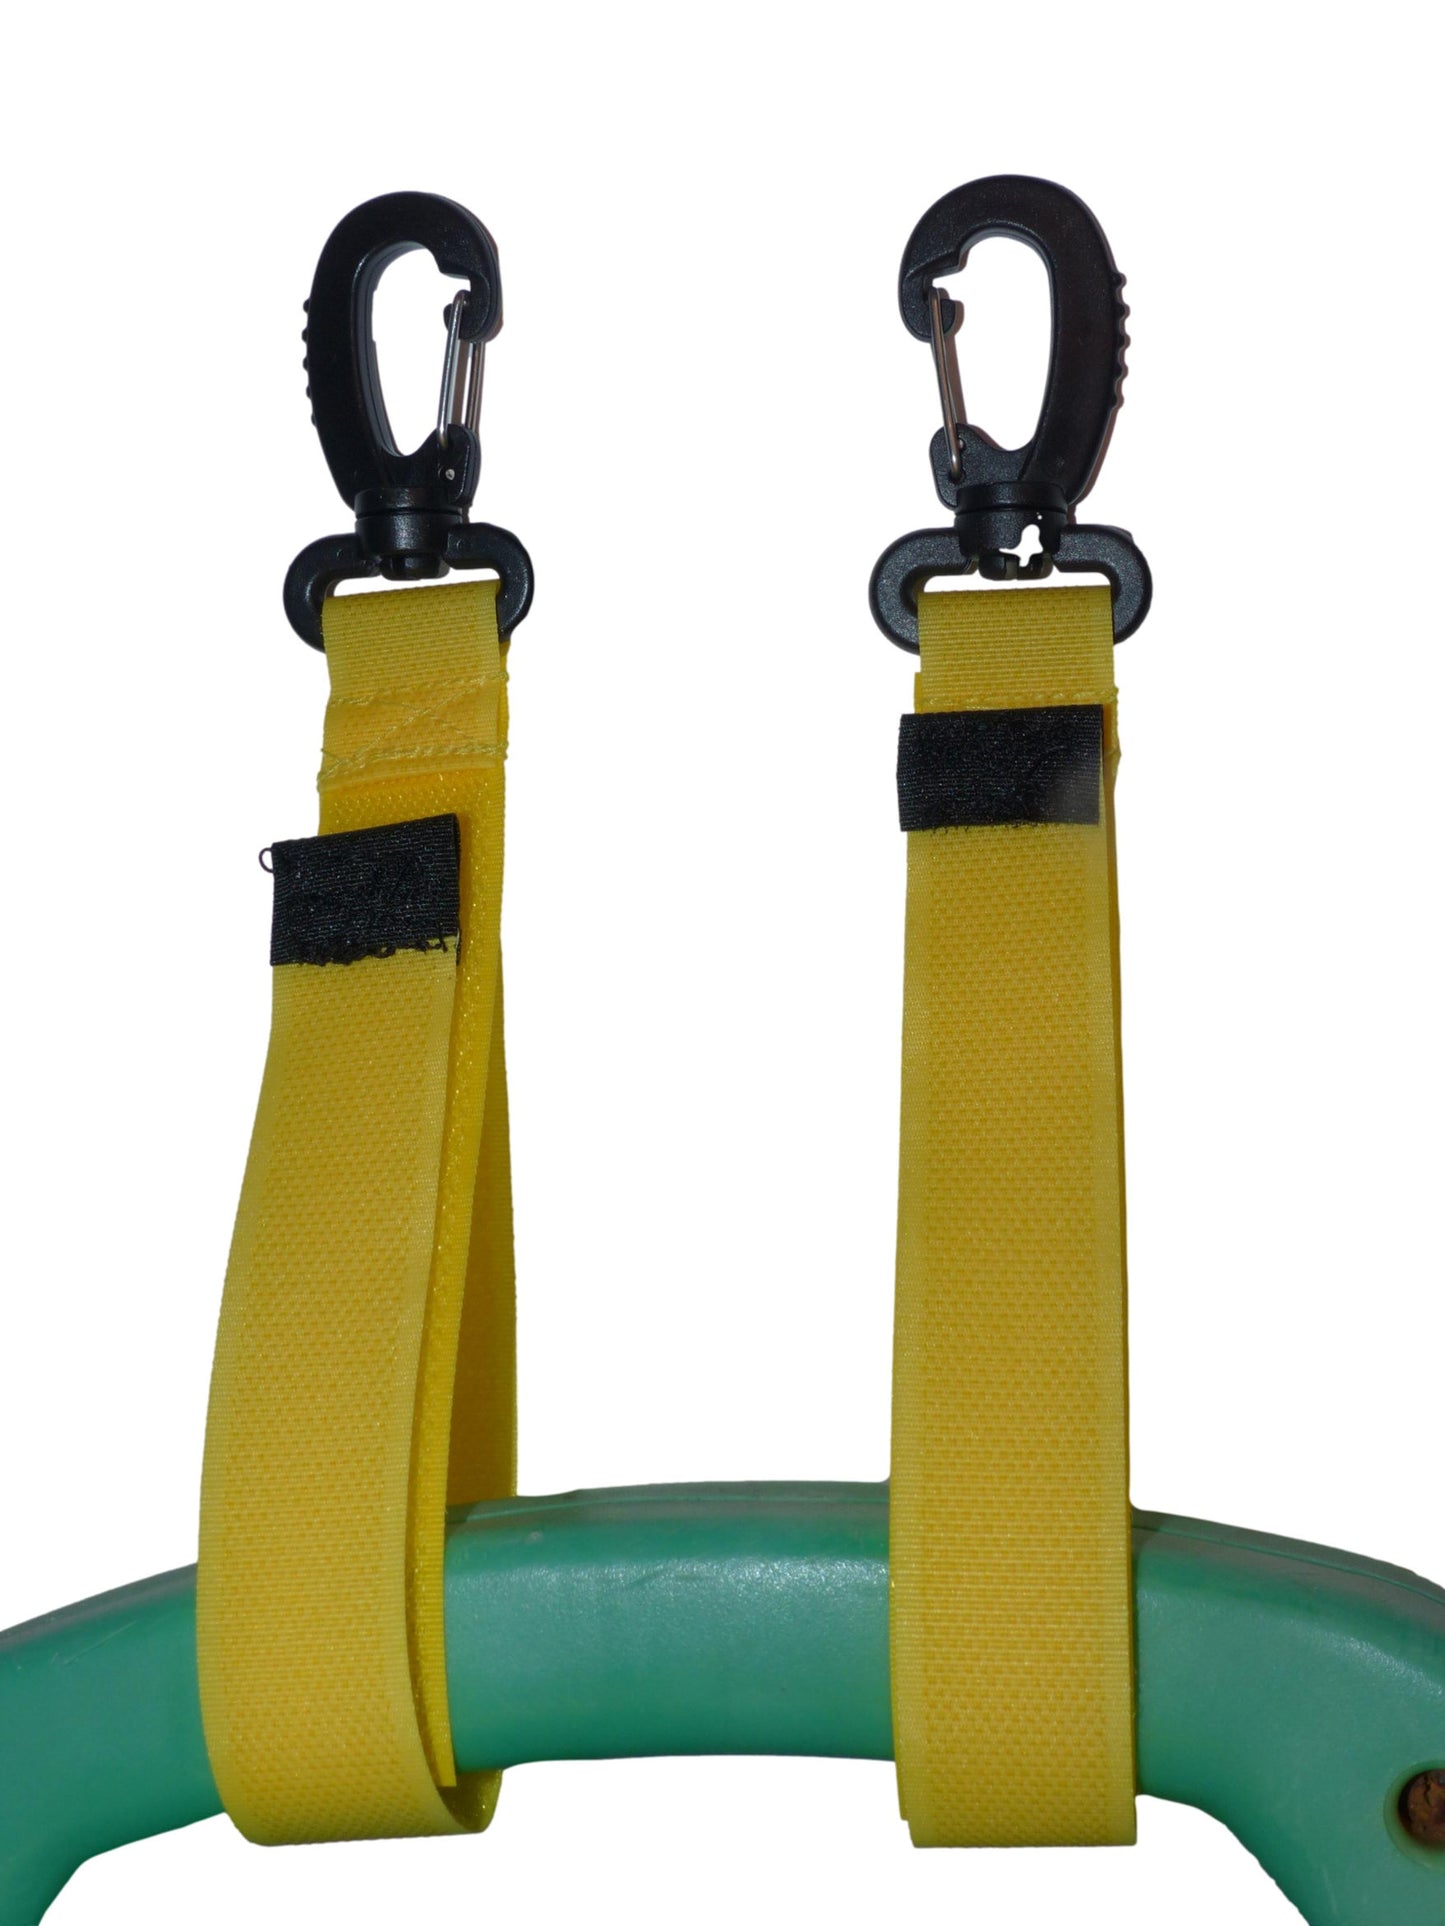 25mm Hook & Loop Hanging Strap with Snap Buckle (Pair) in yellow